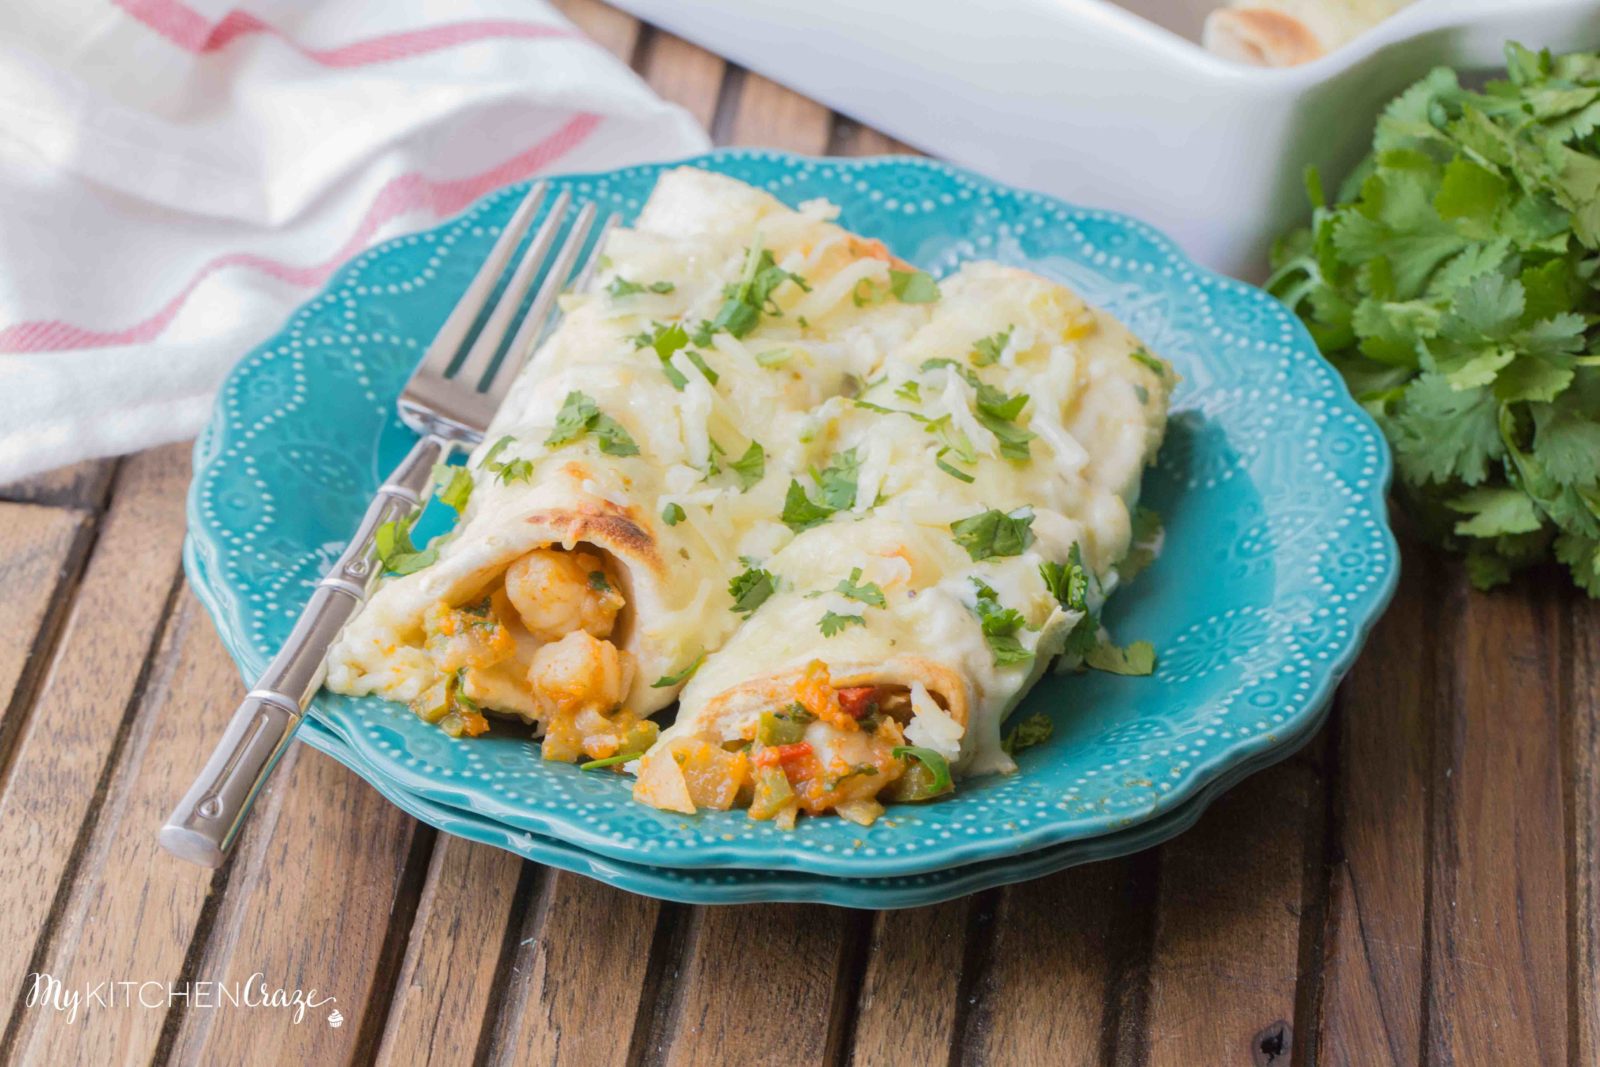 Shrimp Enchiladas ~ Filled with tender, flavorful shrimp then topped with a delicious homemade creamy sauce. You're going to love these enchiladas!